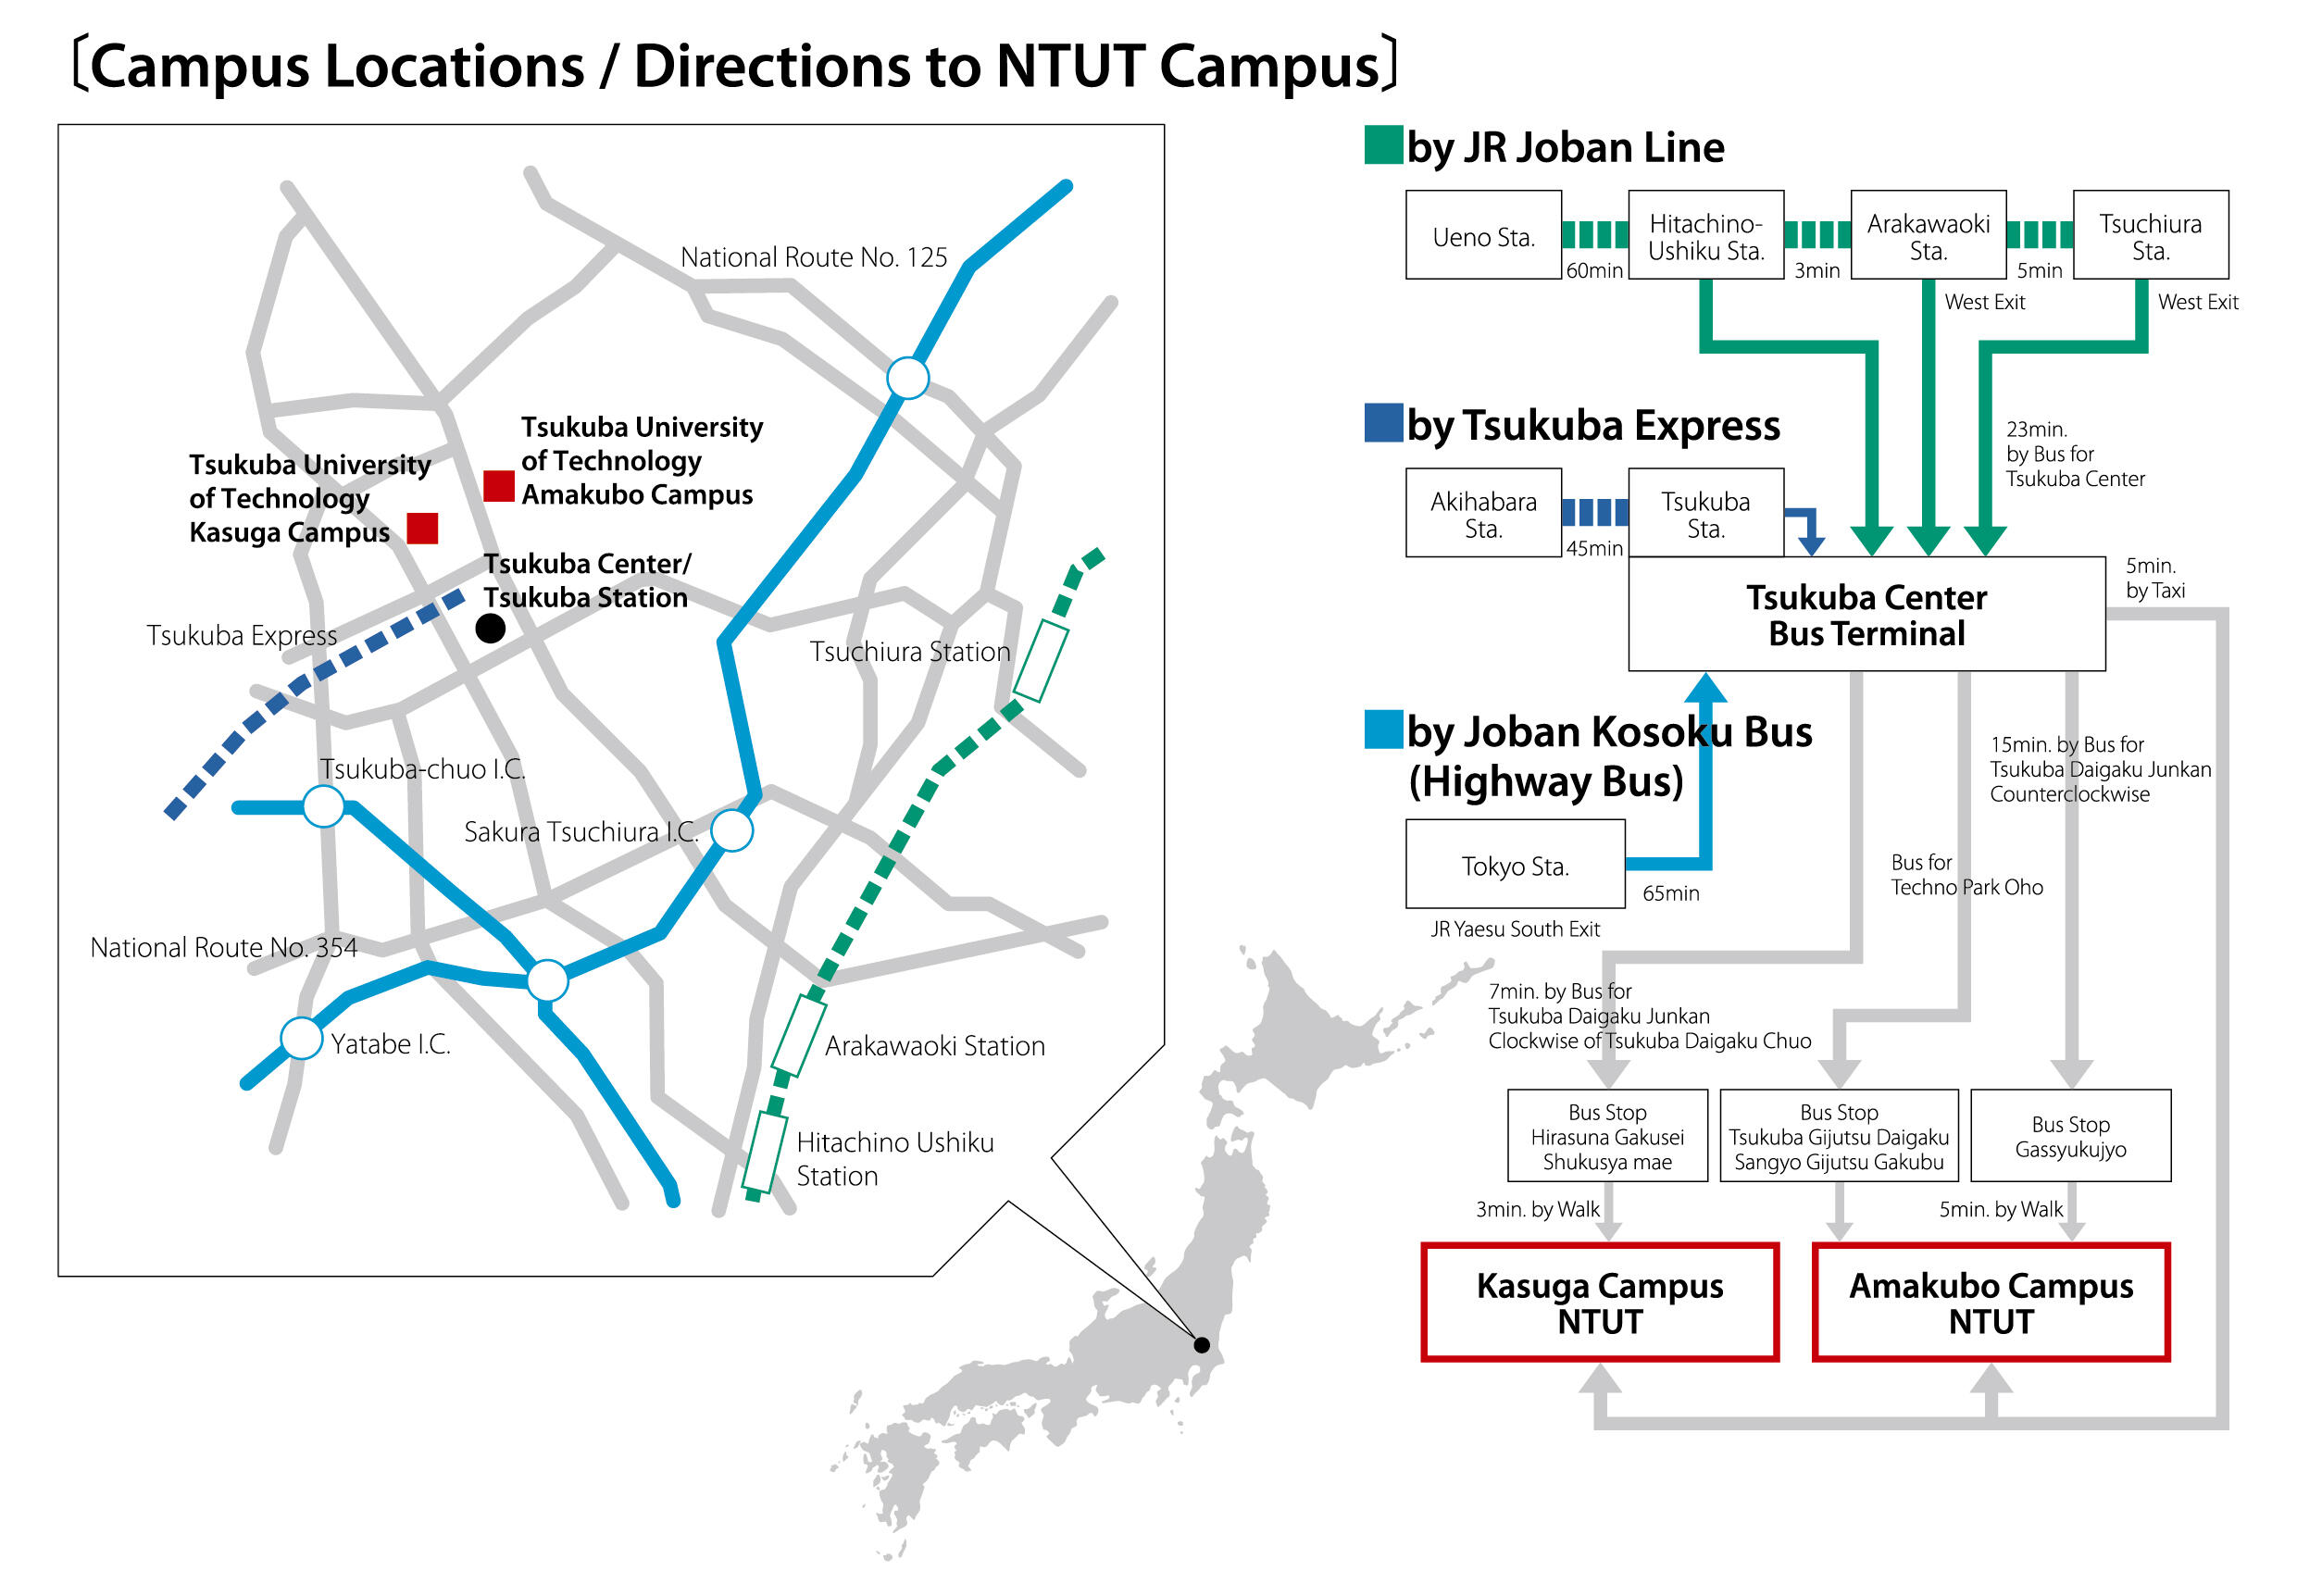 Campus Locations / Directions to NTUT Campus